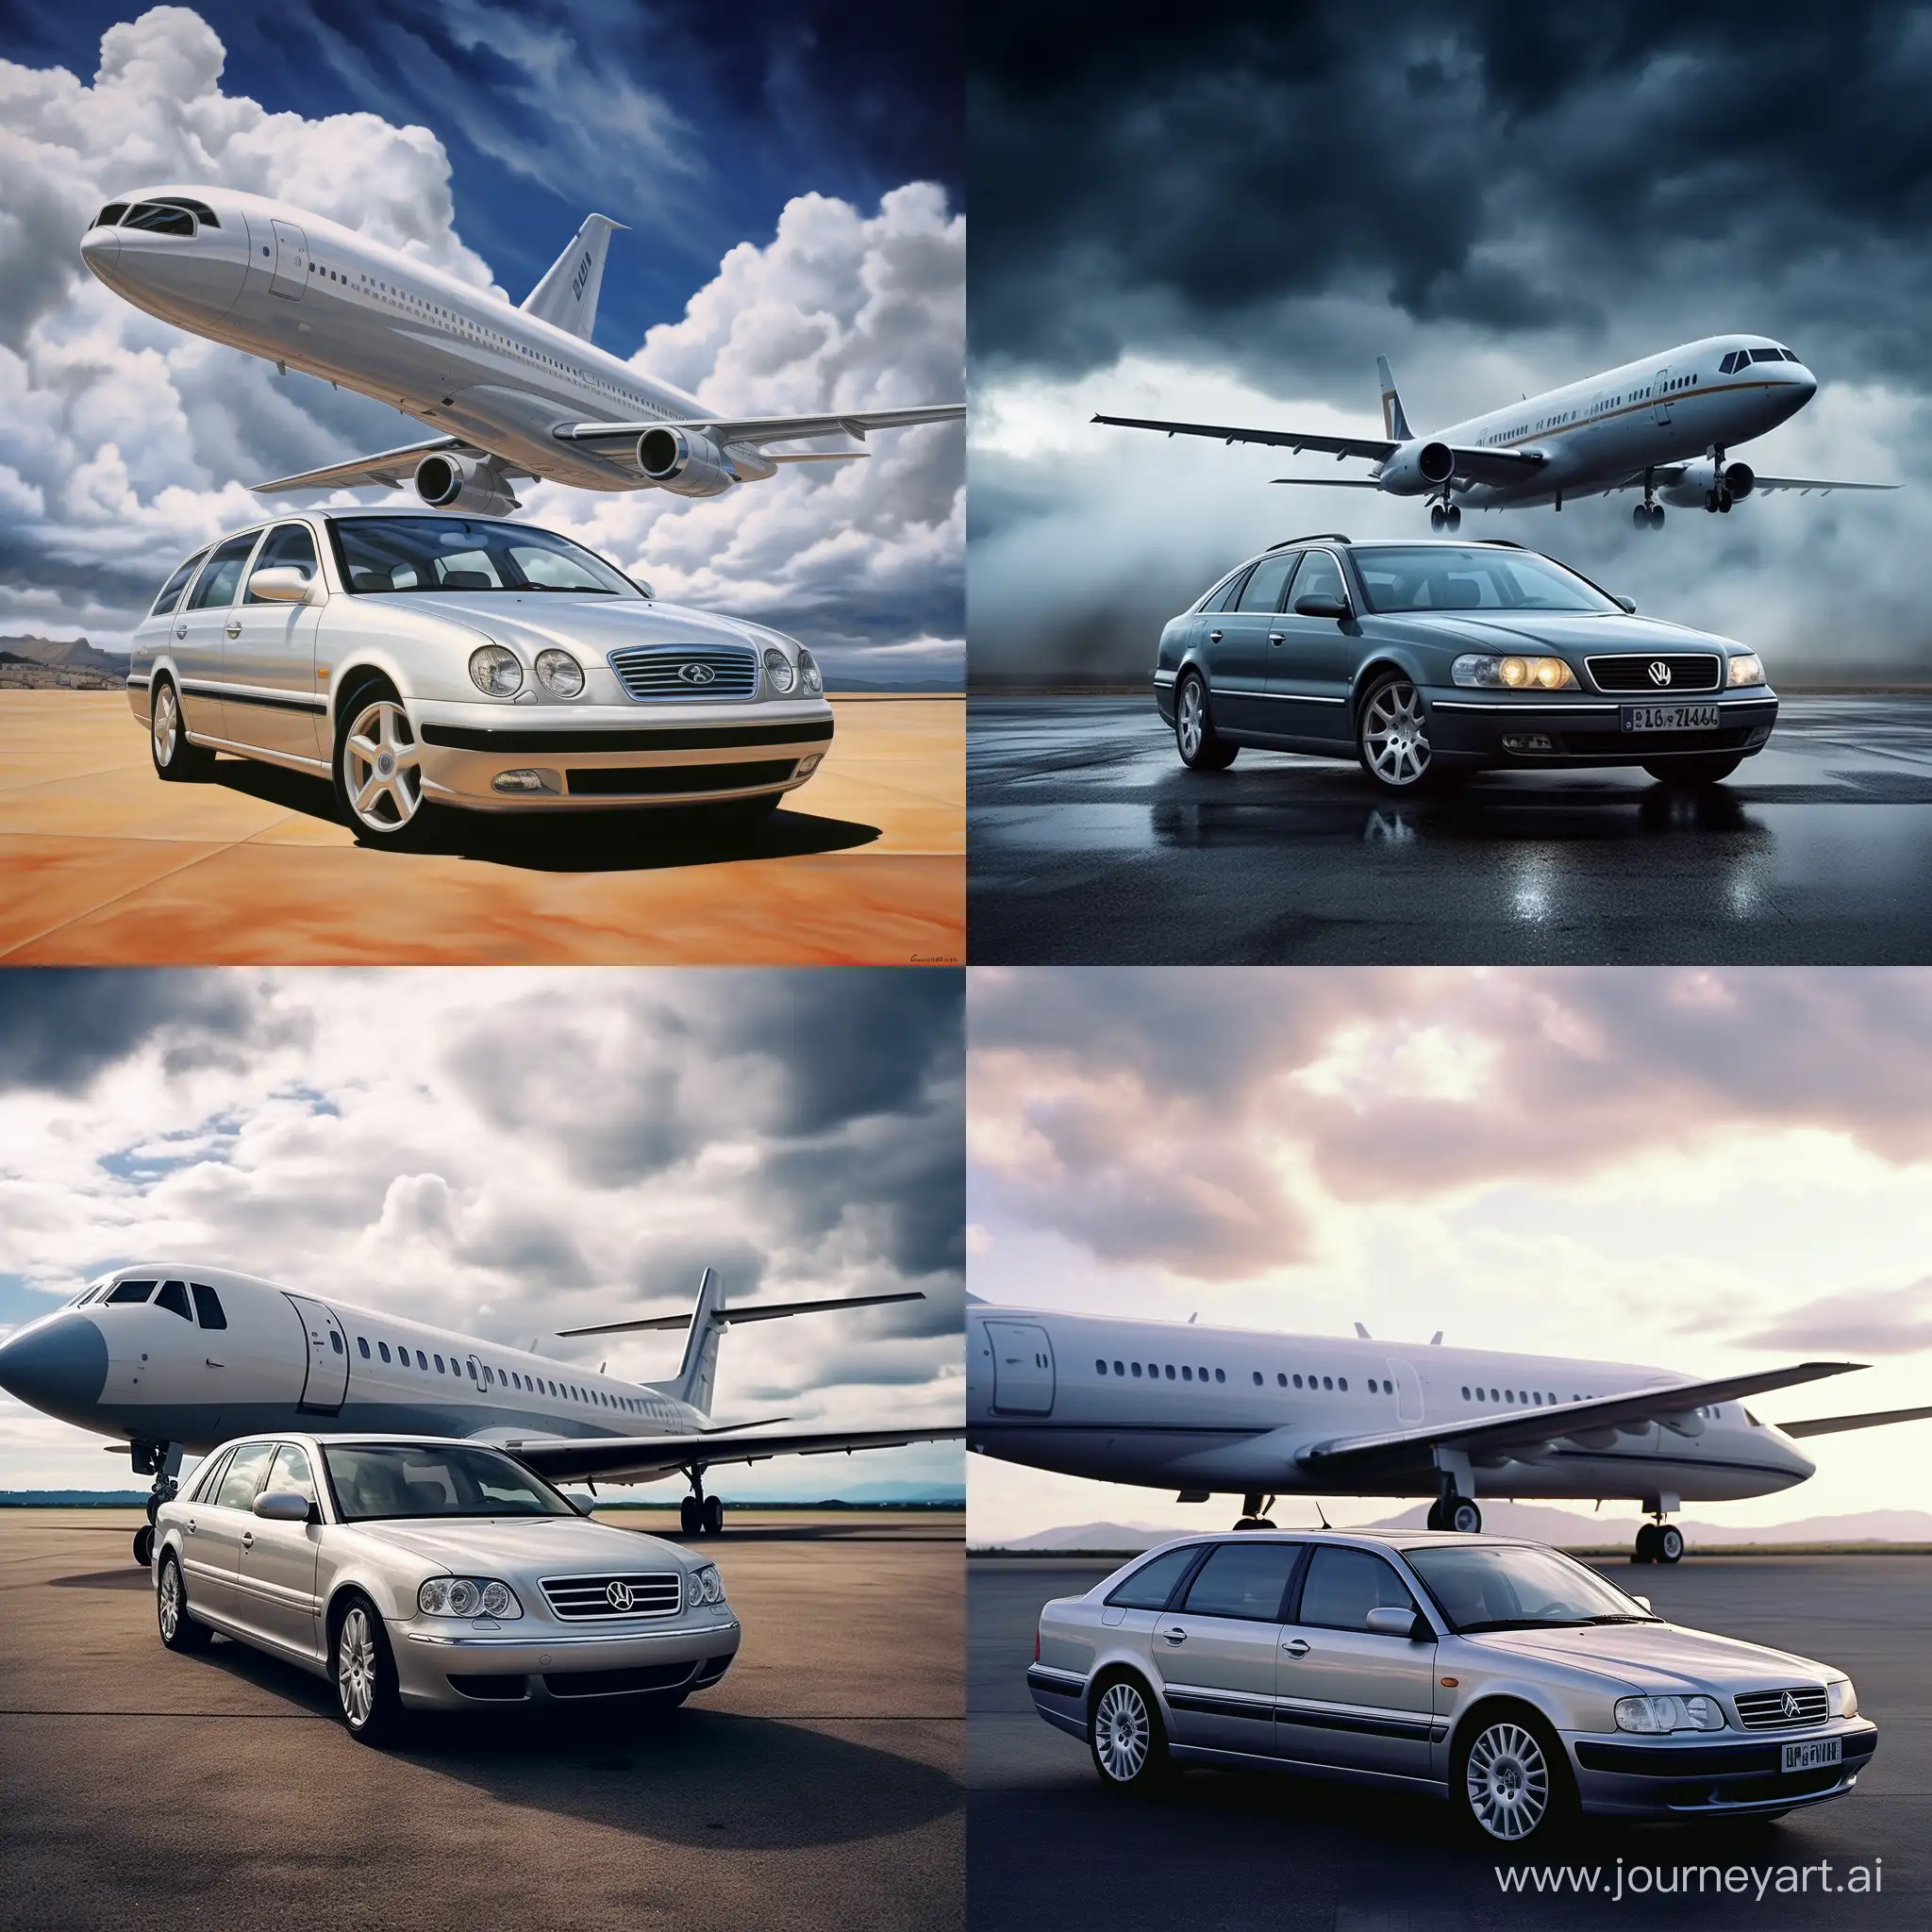 Classic-Passat-B5-2002-Stands-Tall-Against-Airplane-Backdrop